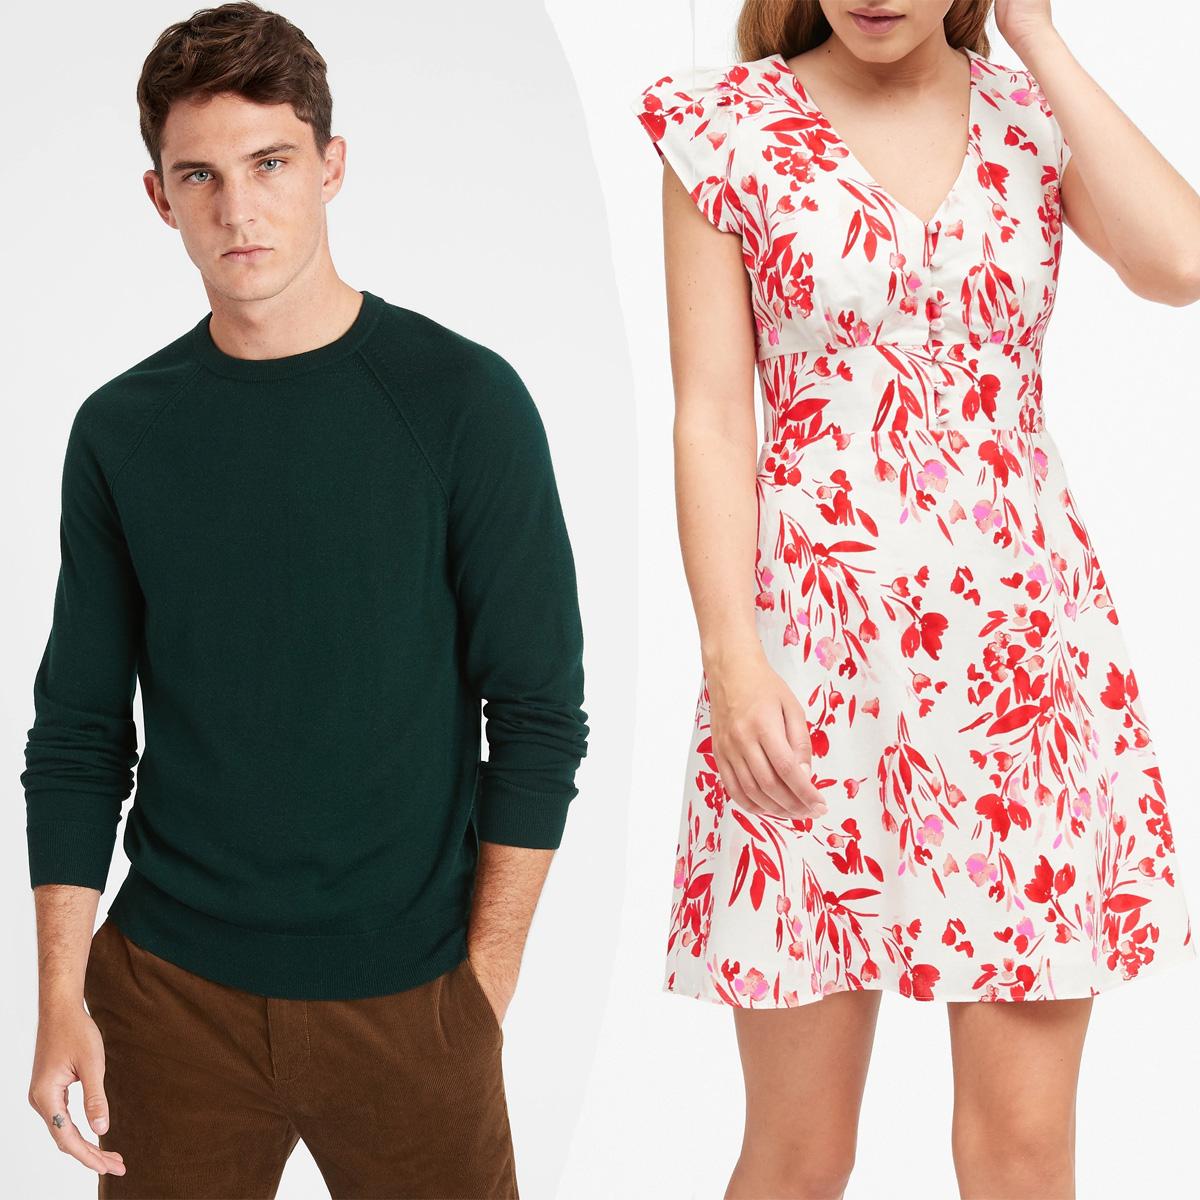 Banana Republic Sweaters and Dresses for 60% Off